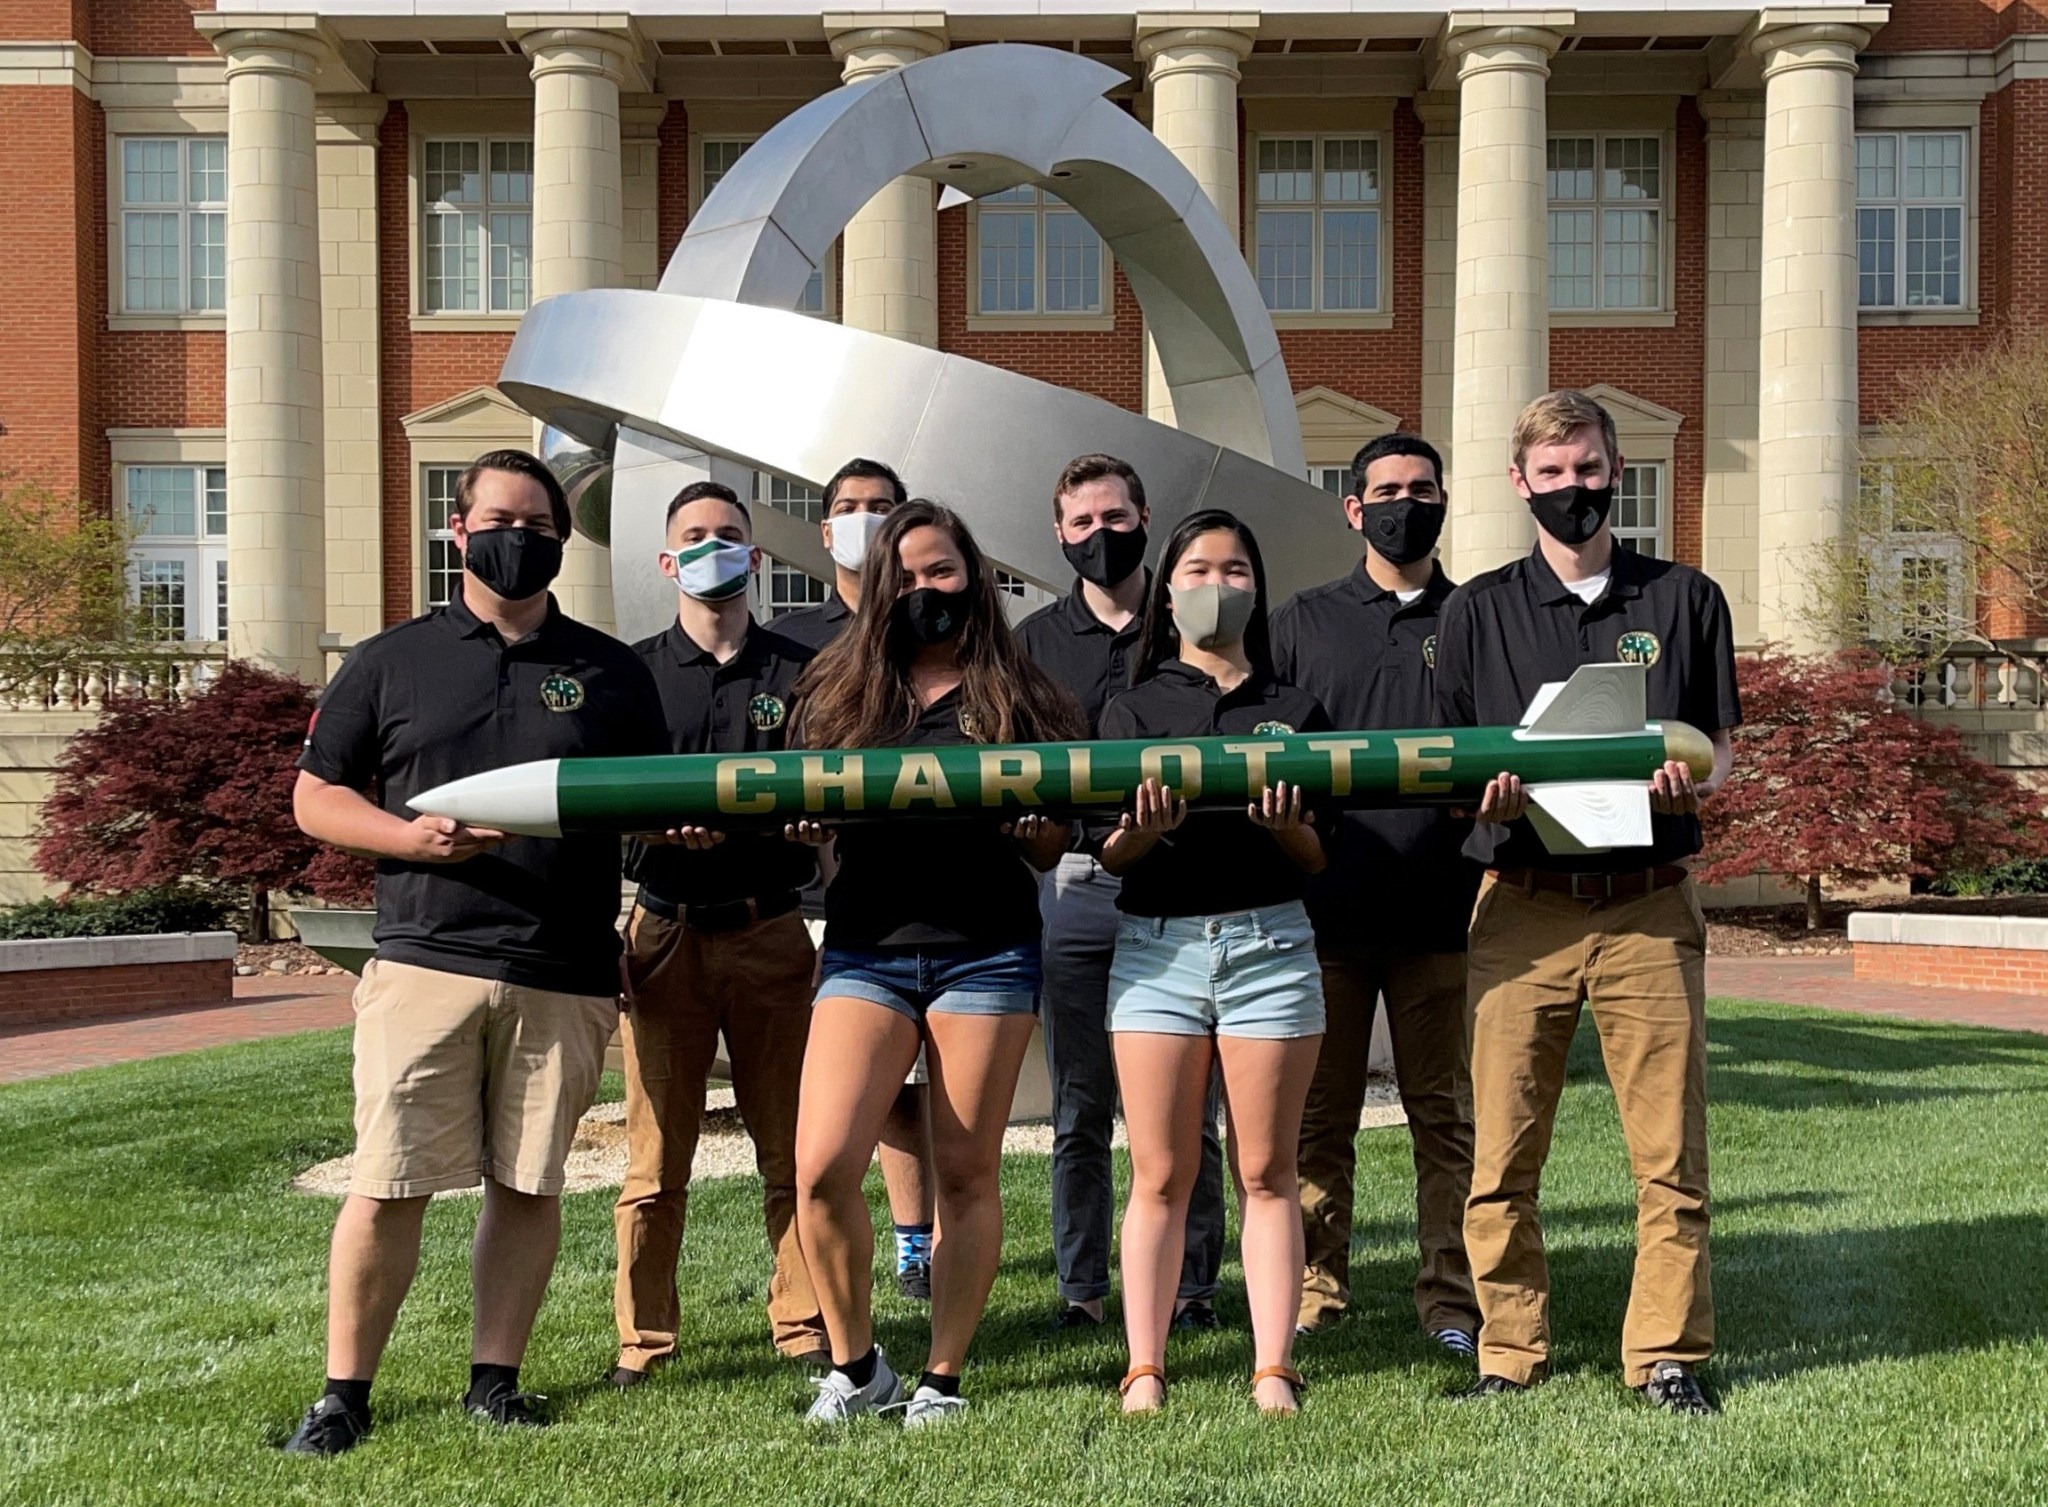 The University of North Carolina at Charlotte, winner of the Launch Division in the 2021 Student Launch competition. 